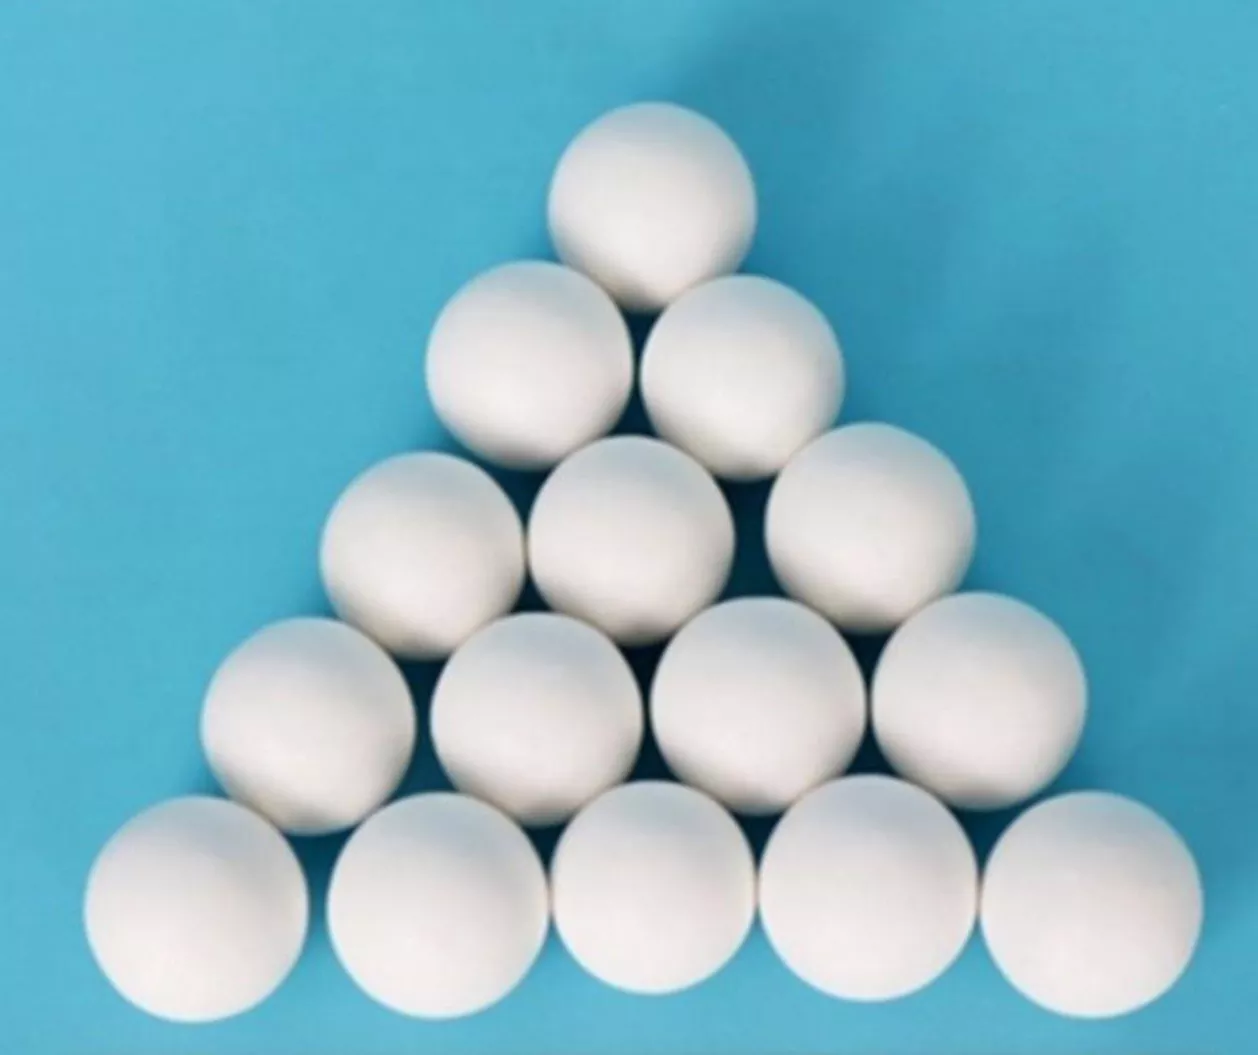 What is the Specific Gravity of Ceramic Alumina Balls?